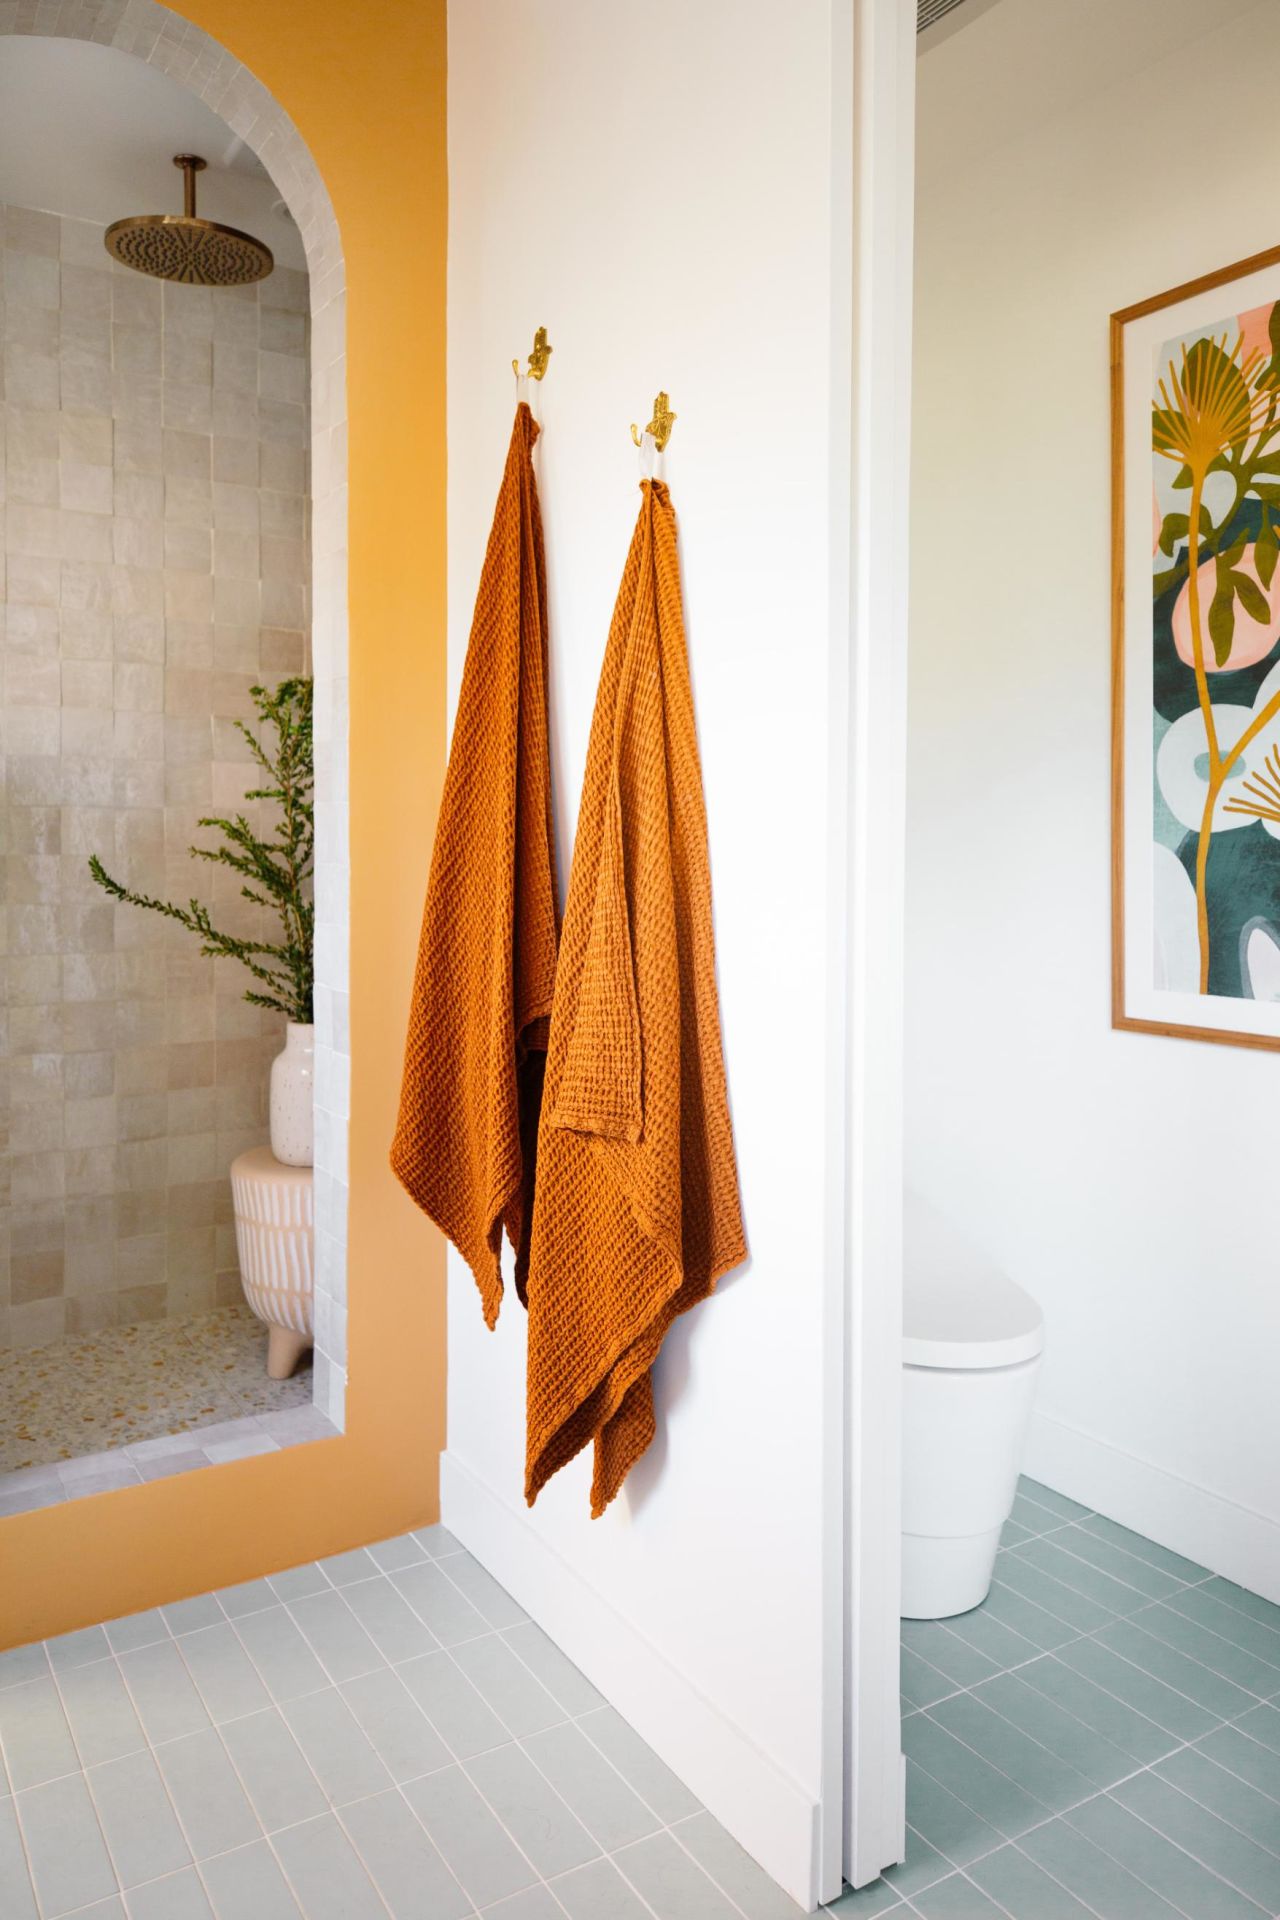 Paint isn't the only way to add color to a room -- smaller home decor like towels can enliven a space.